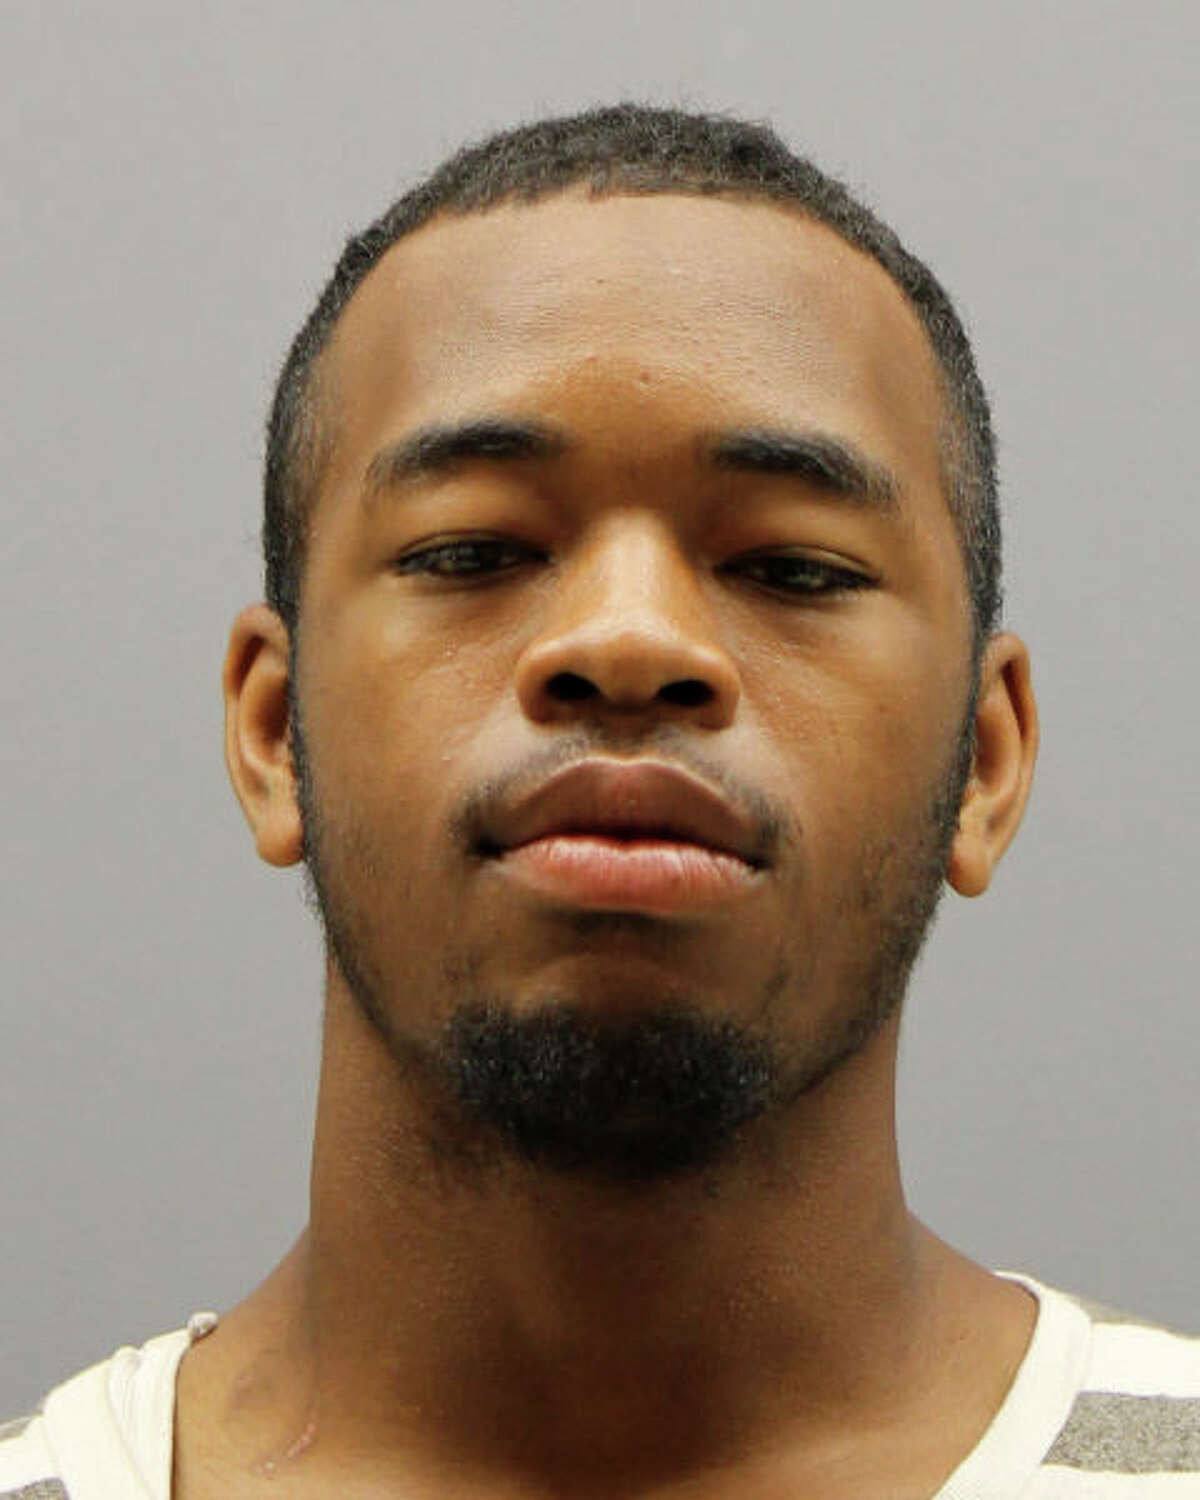 Jasper Spires of Washington, D.C., is charged with first-degree murder and felony murder in the death of Kevin Sutherland, a native of Trumbull, Conn.